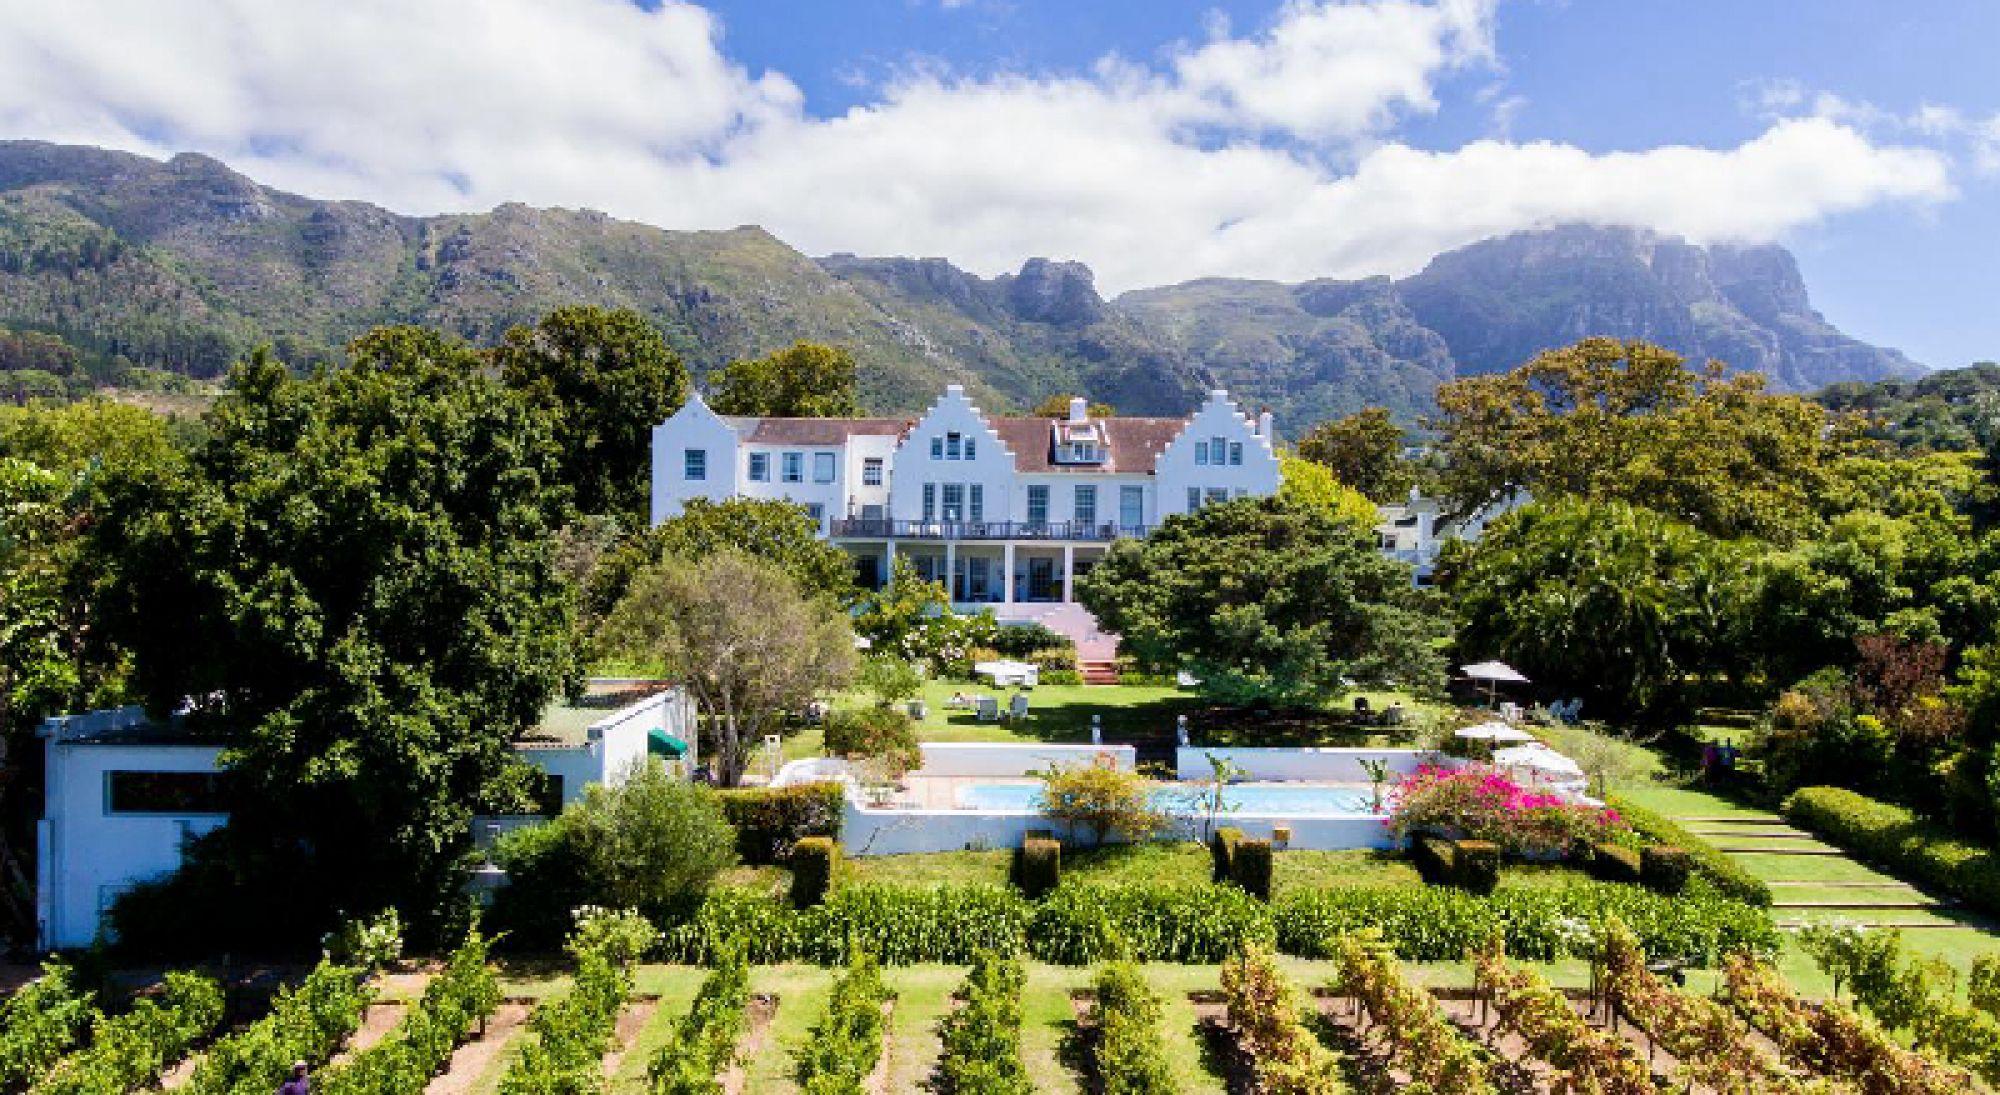 View The Cellars Hohenort Hotel's scenic hotel situated in gorgeous South Africa.